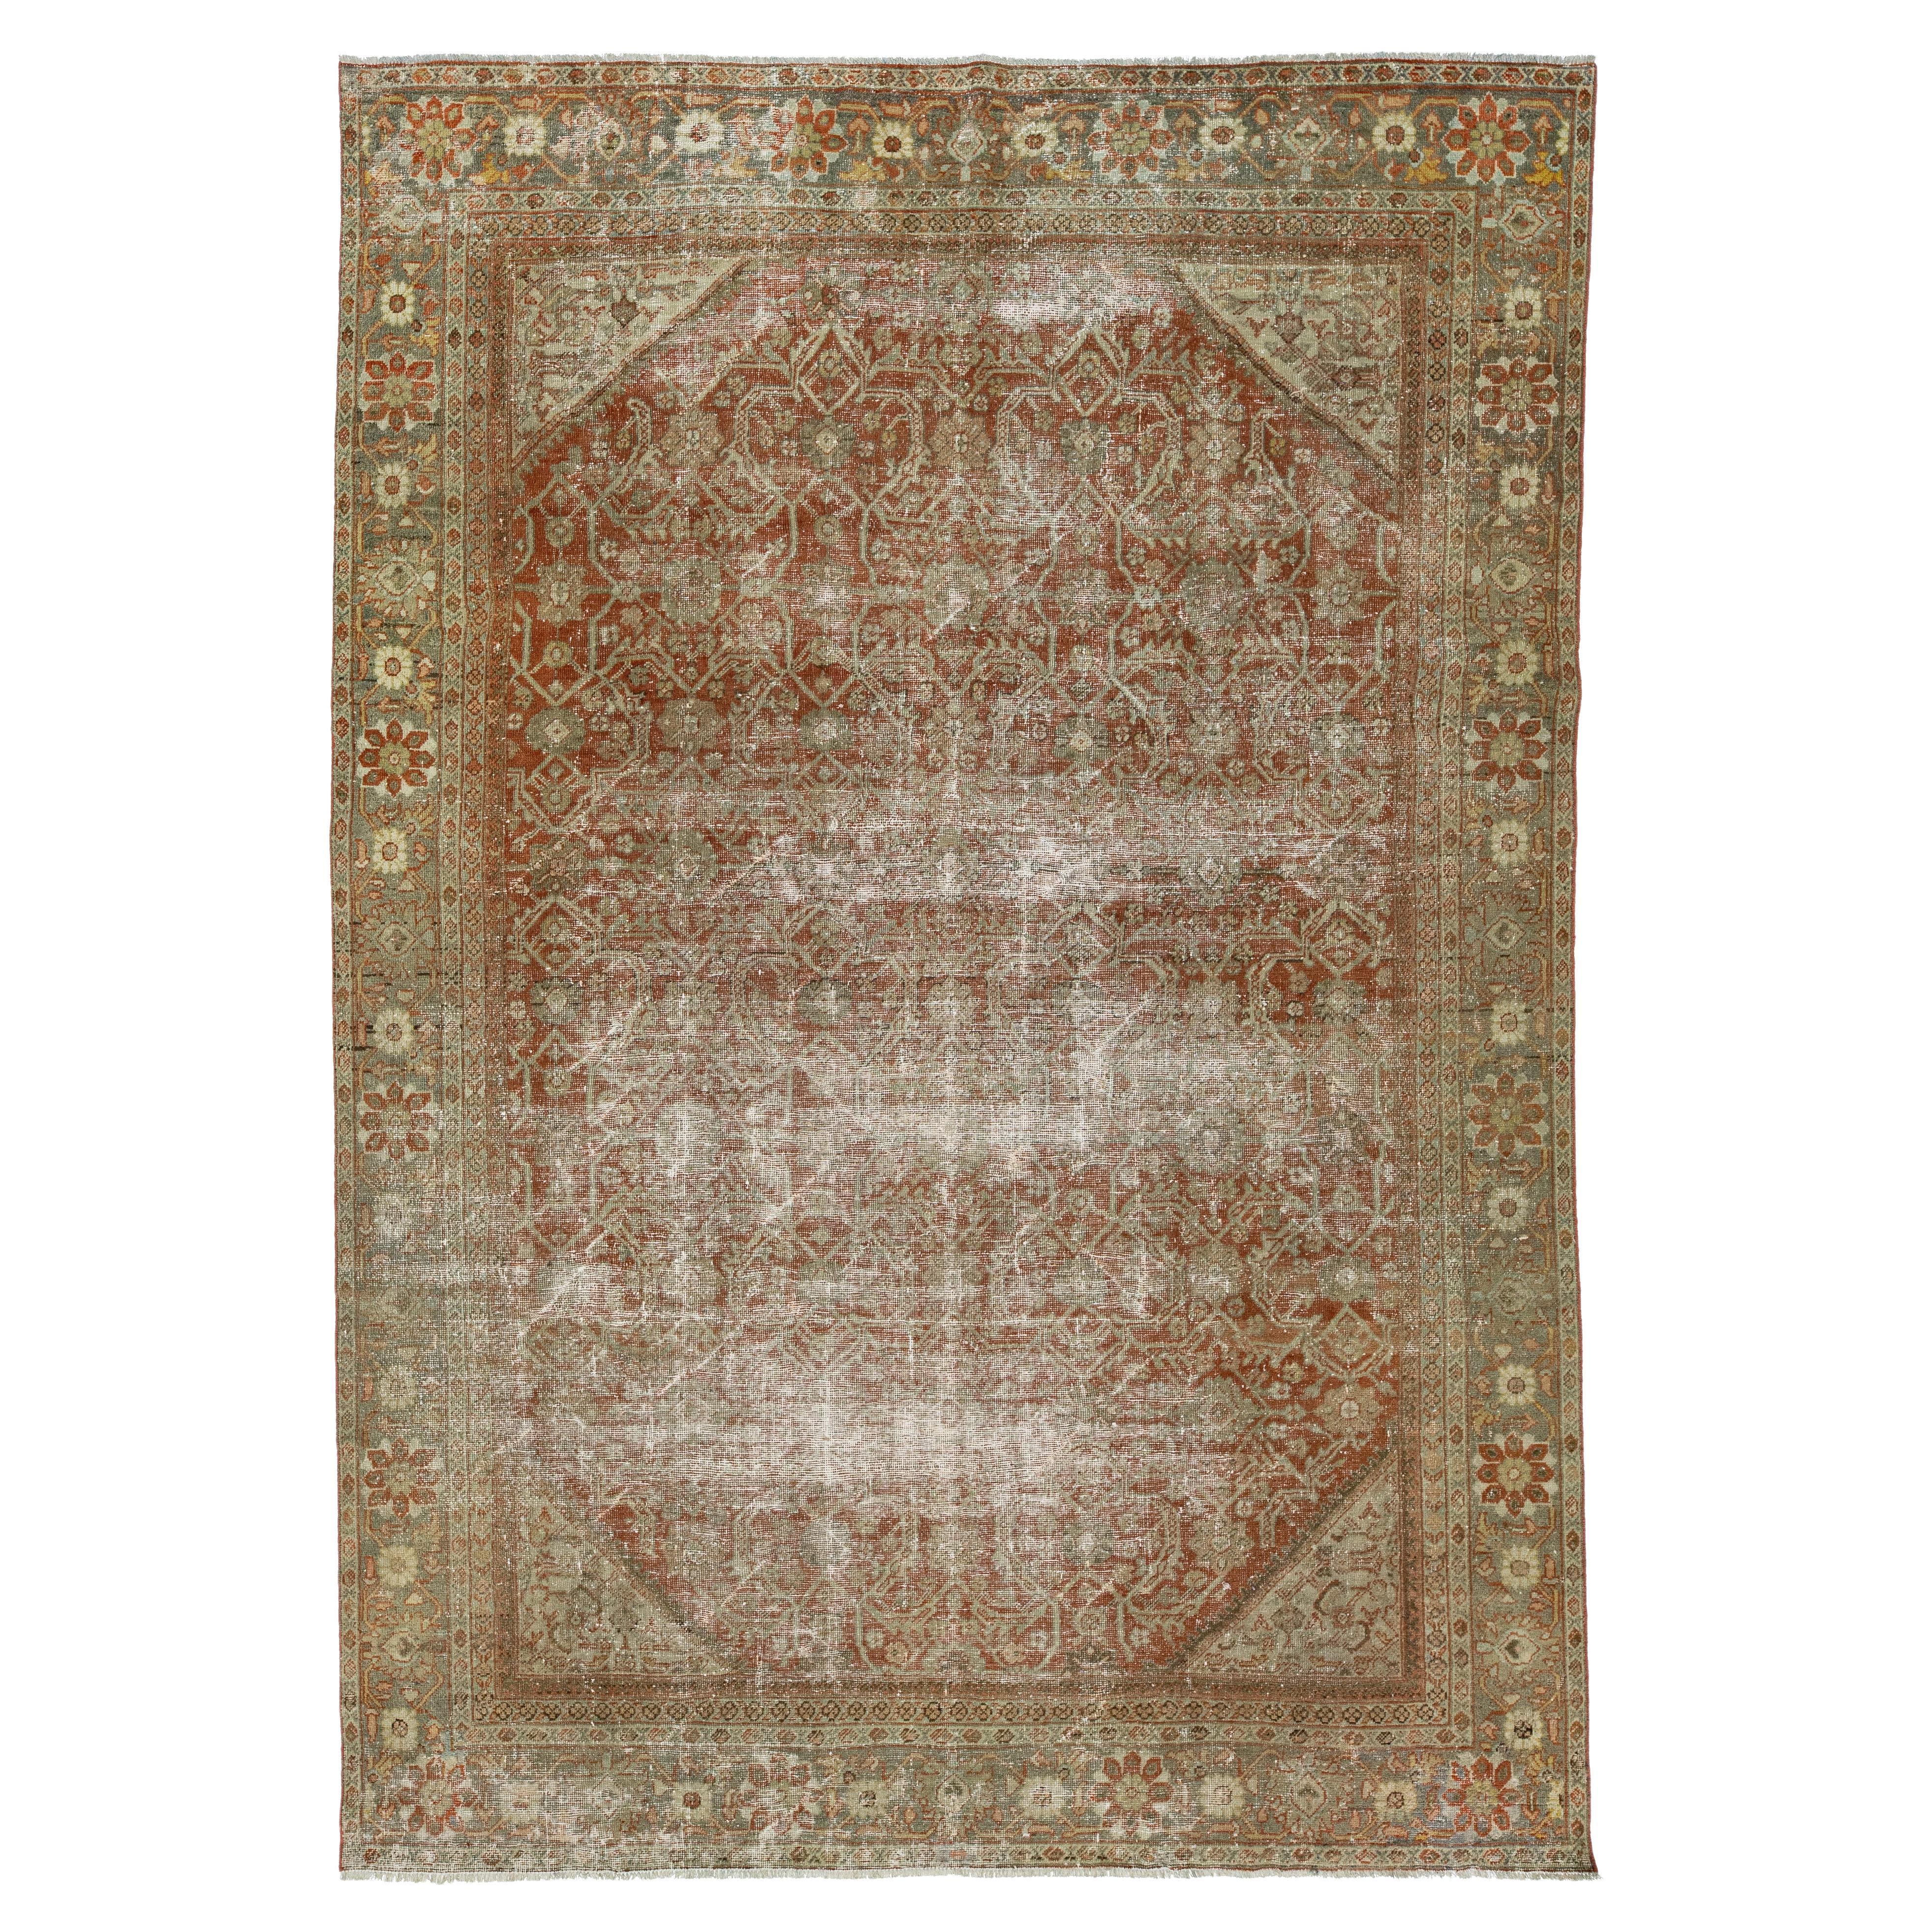 Handmade Antique Persian Mahal Wool Rug In Rust Color with Allover Design